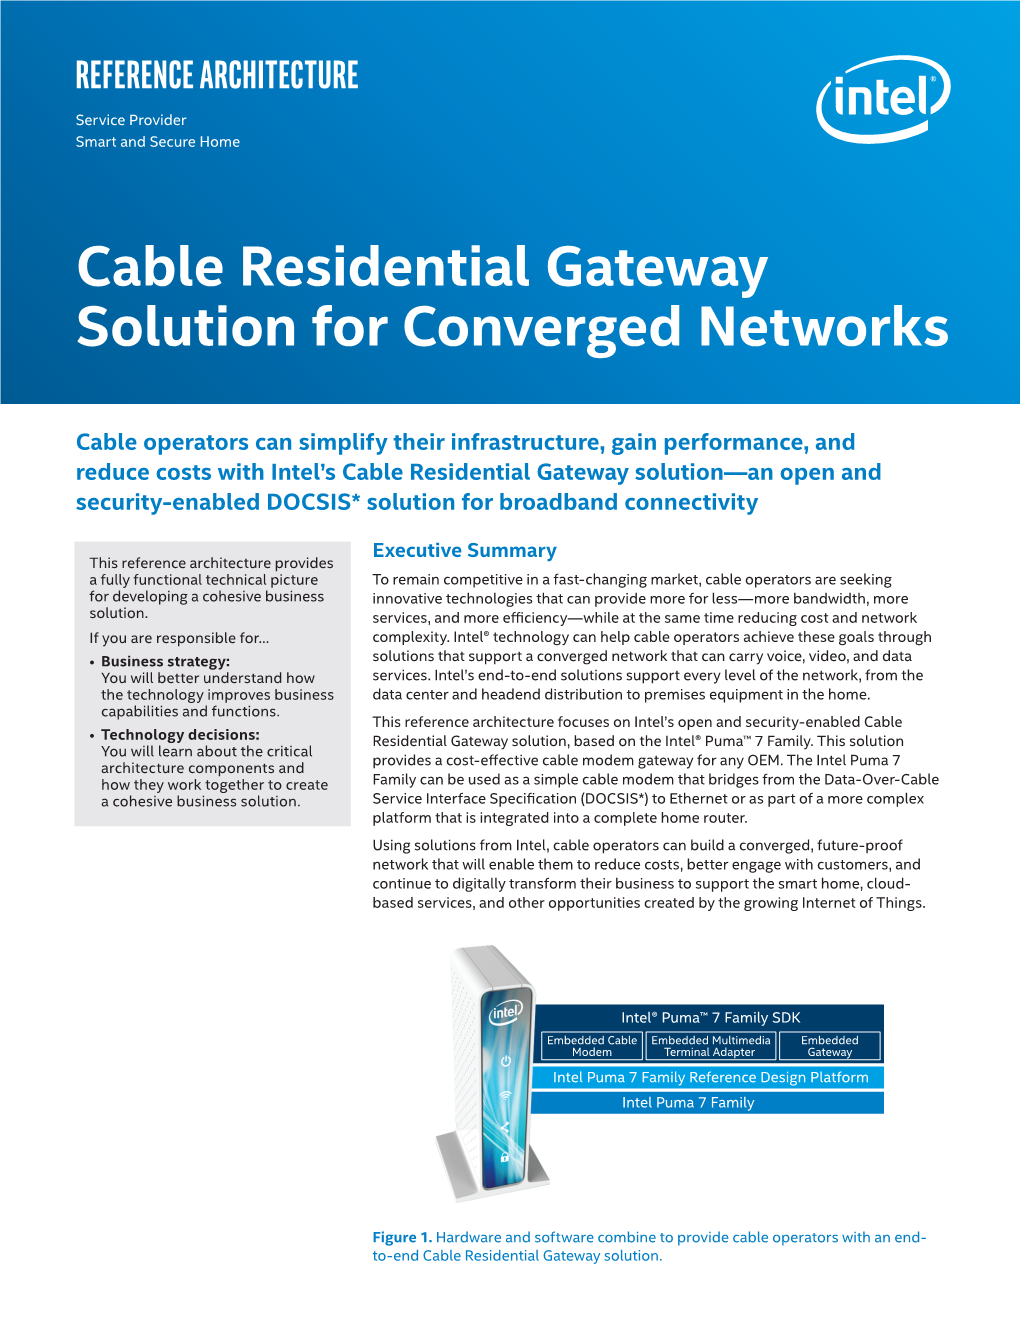 Cable Residential Gateway Solution for Converged Networks